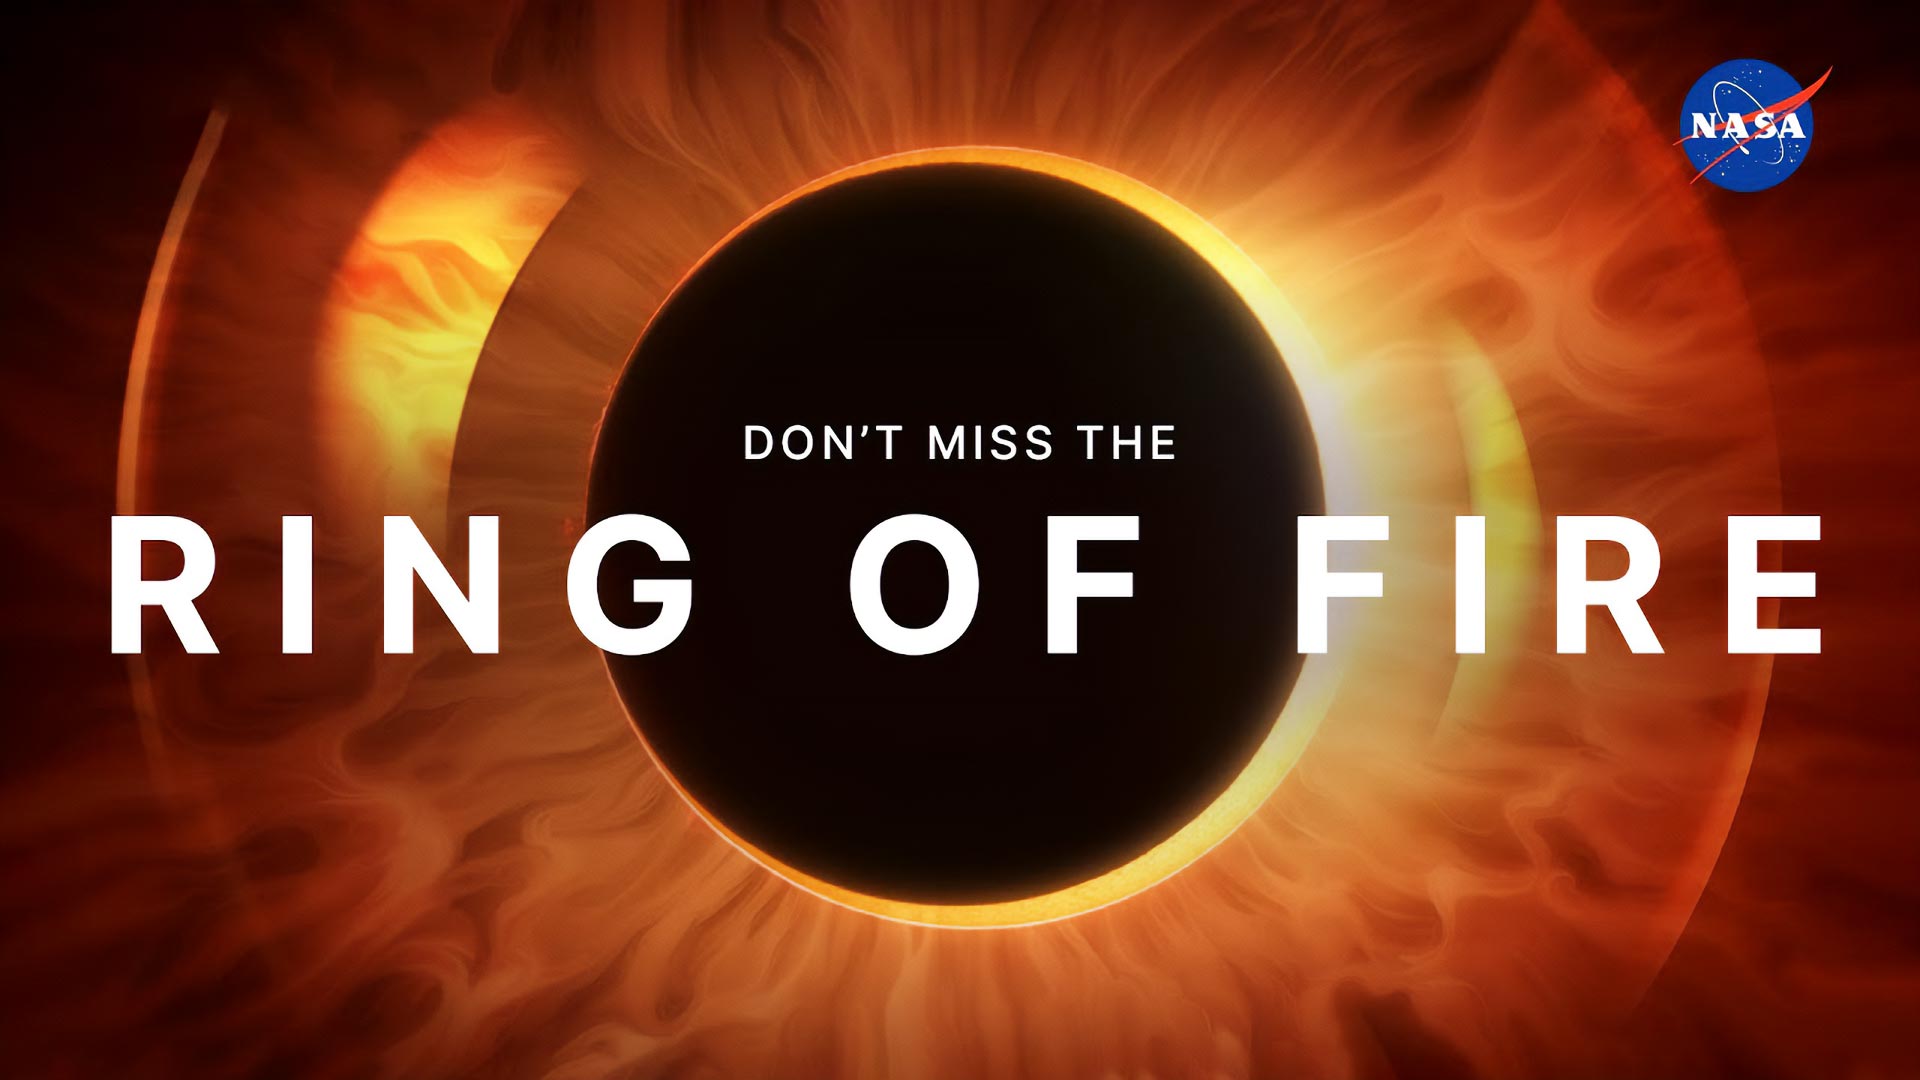 Don't Miss: A “Ring of Fire” in the Sky